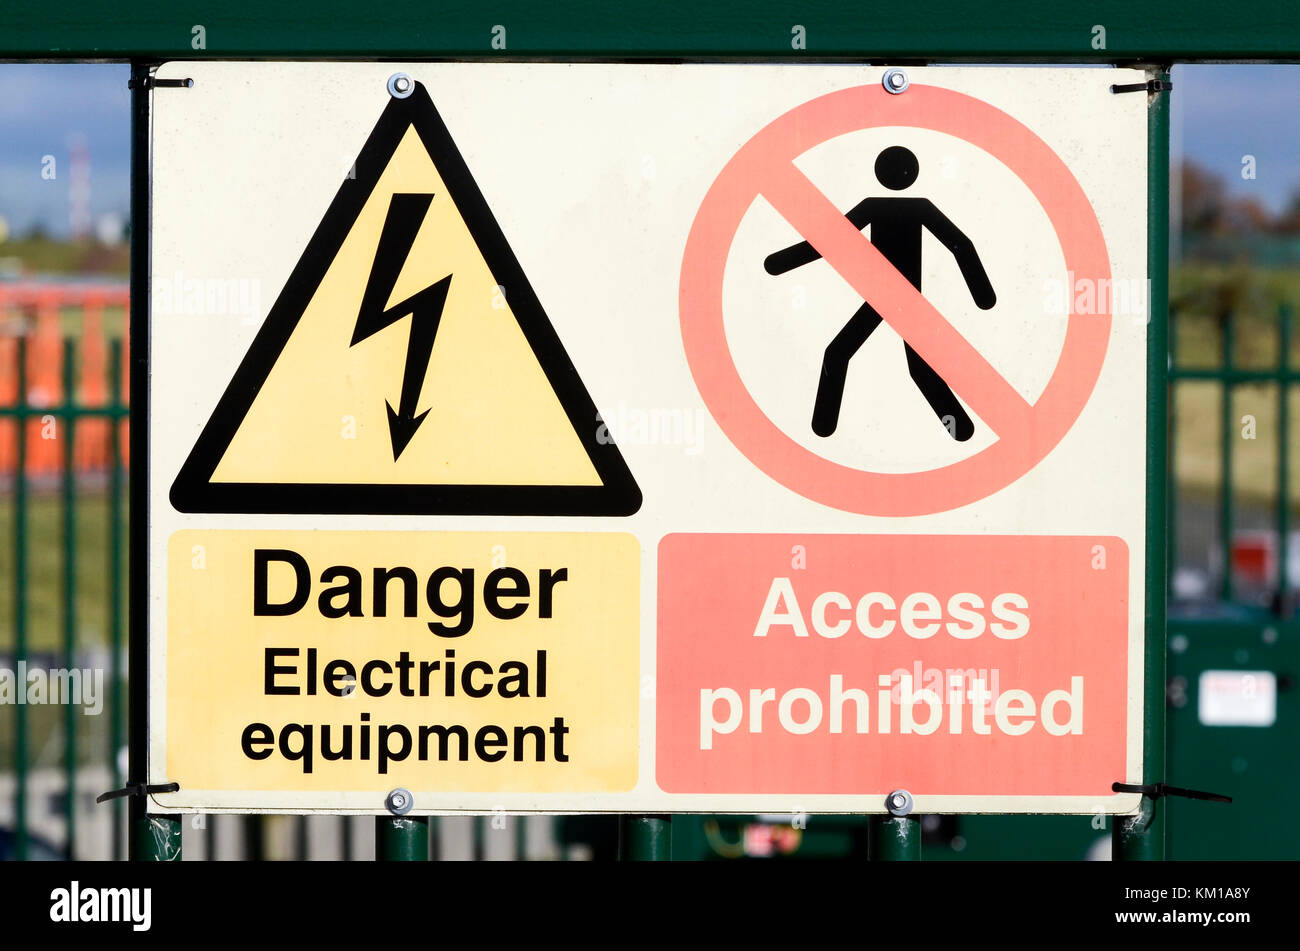 Danger Electrical Equipment Access Prohibited since on countryside fence near electricity sub-station, West Midlands, UK. Stock Photo